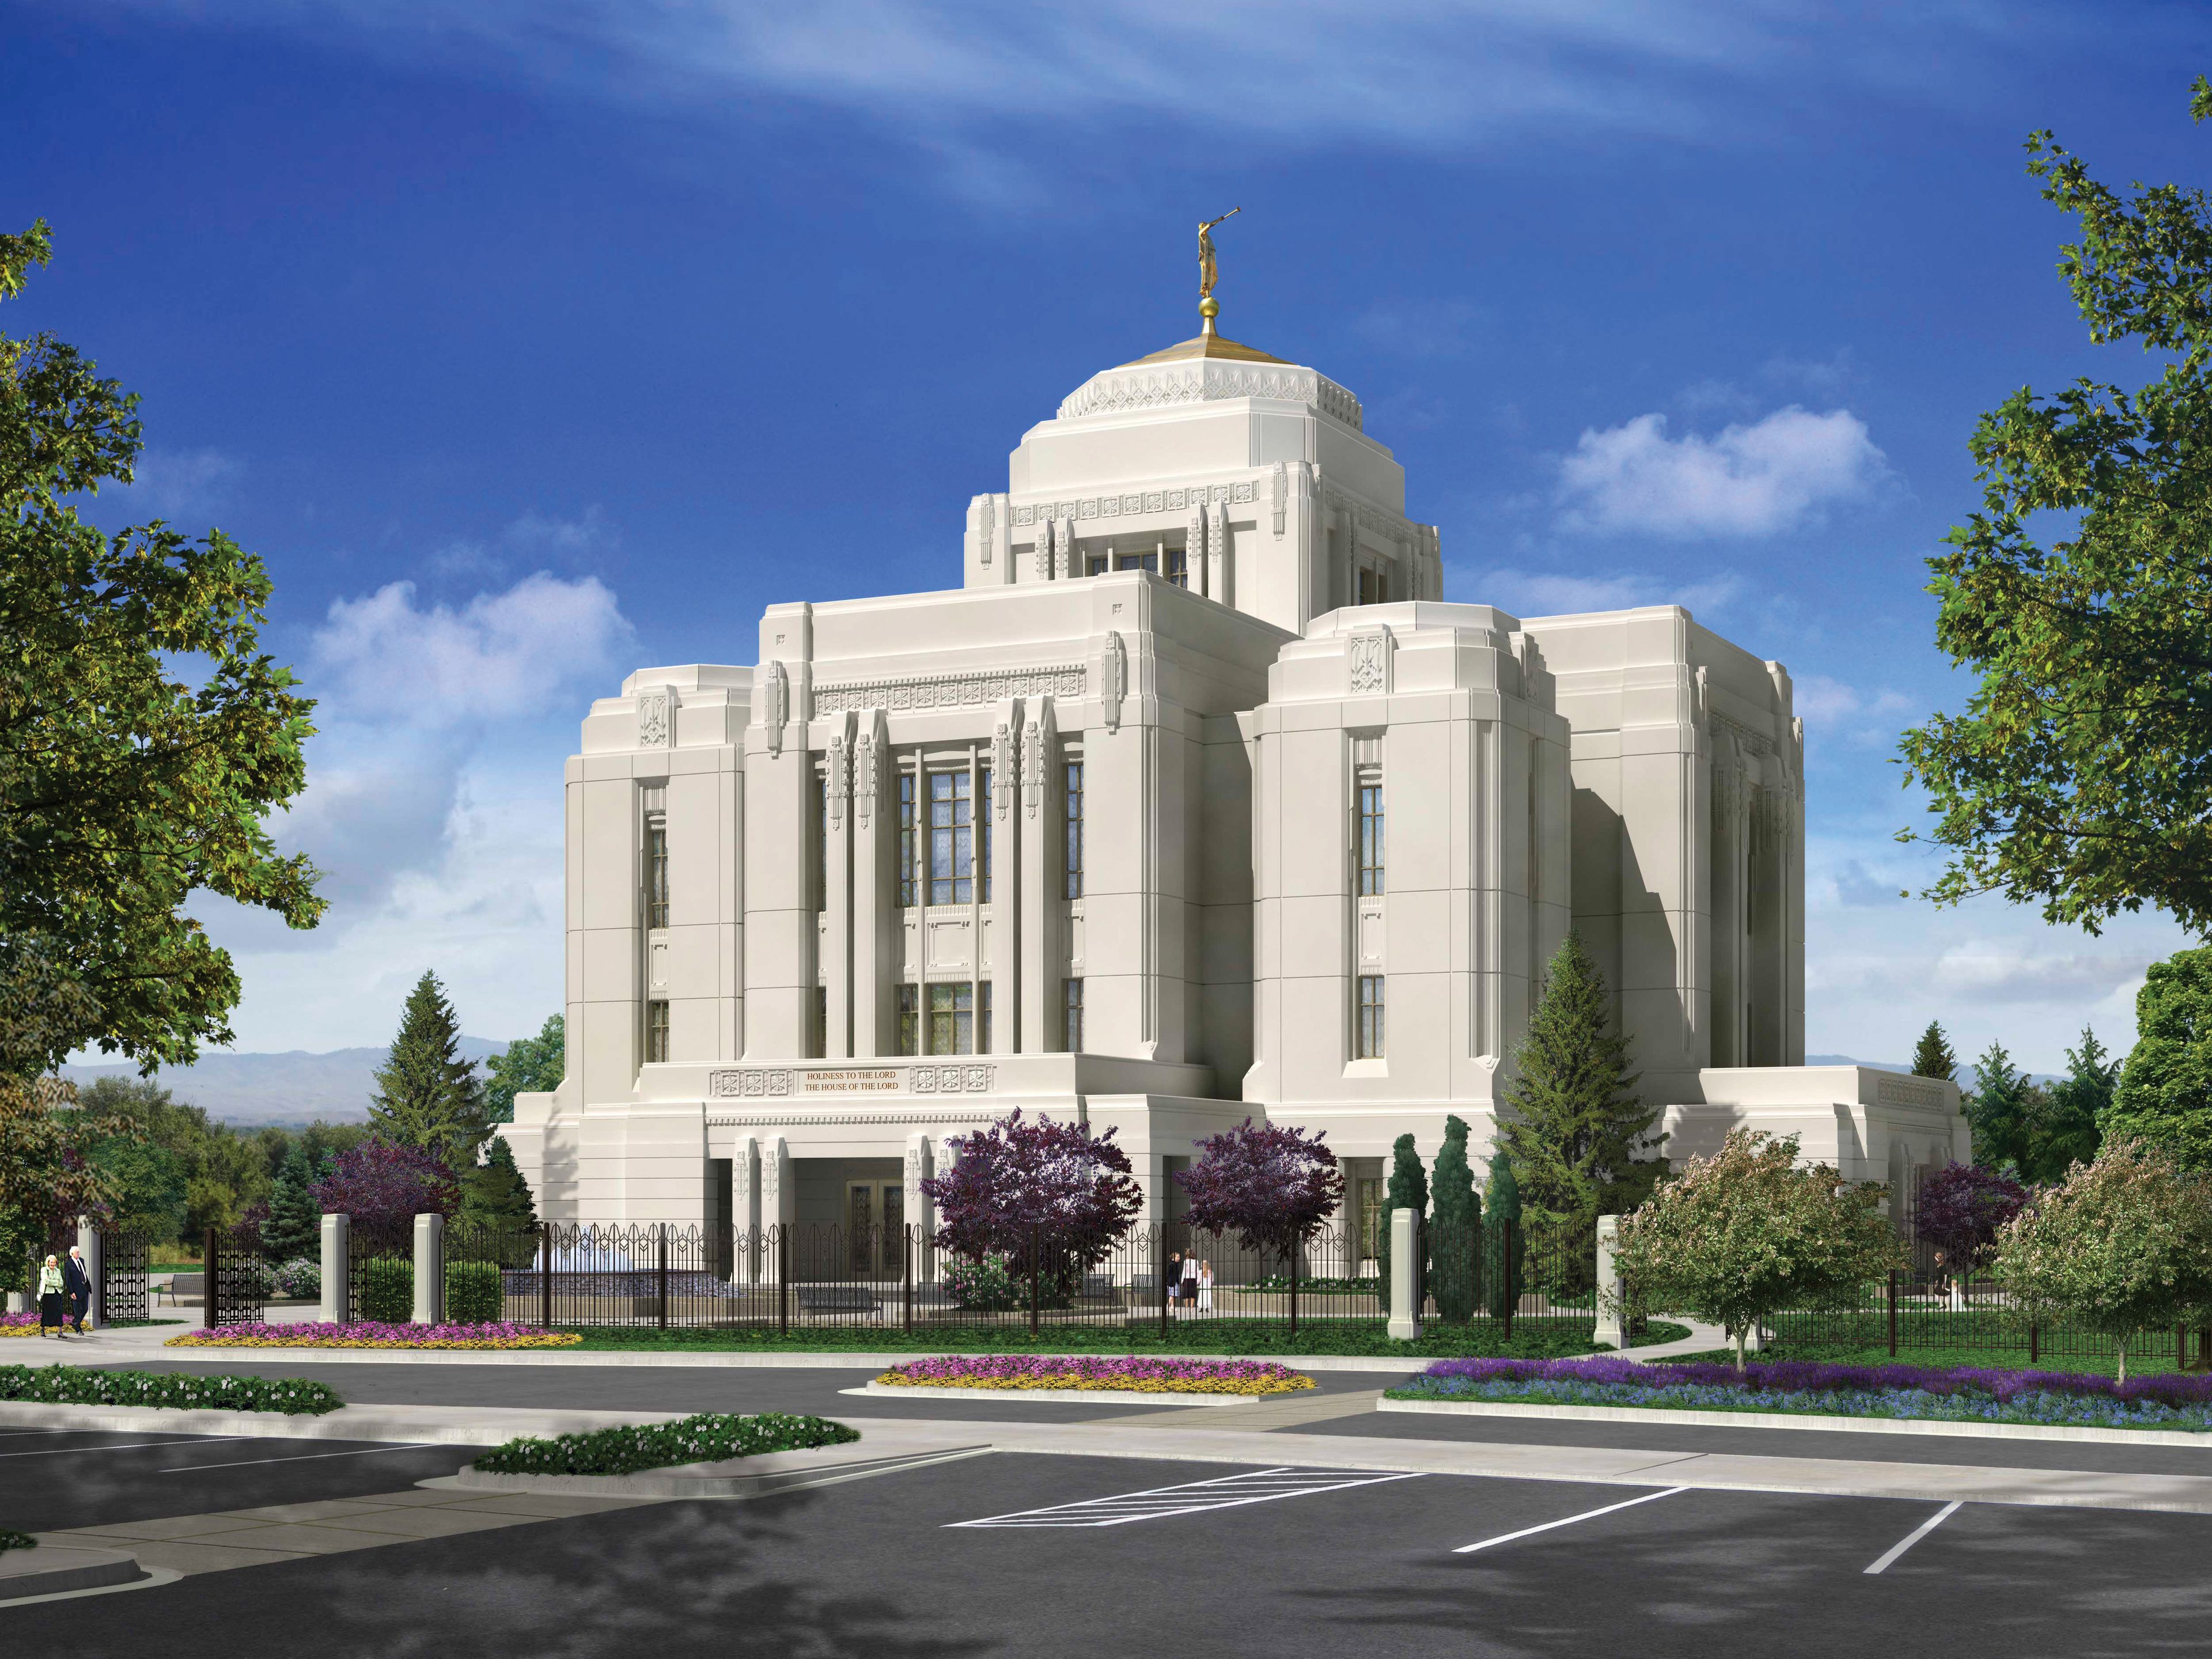 An artist’s rendering of the exterior of the Meridian Idaho Temple.